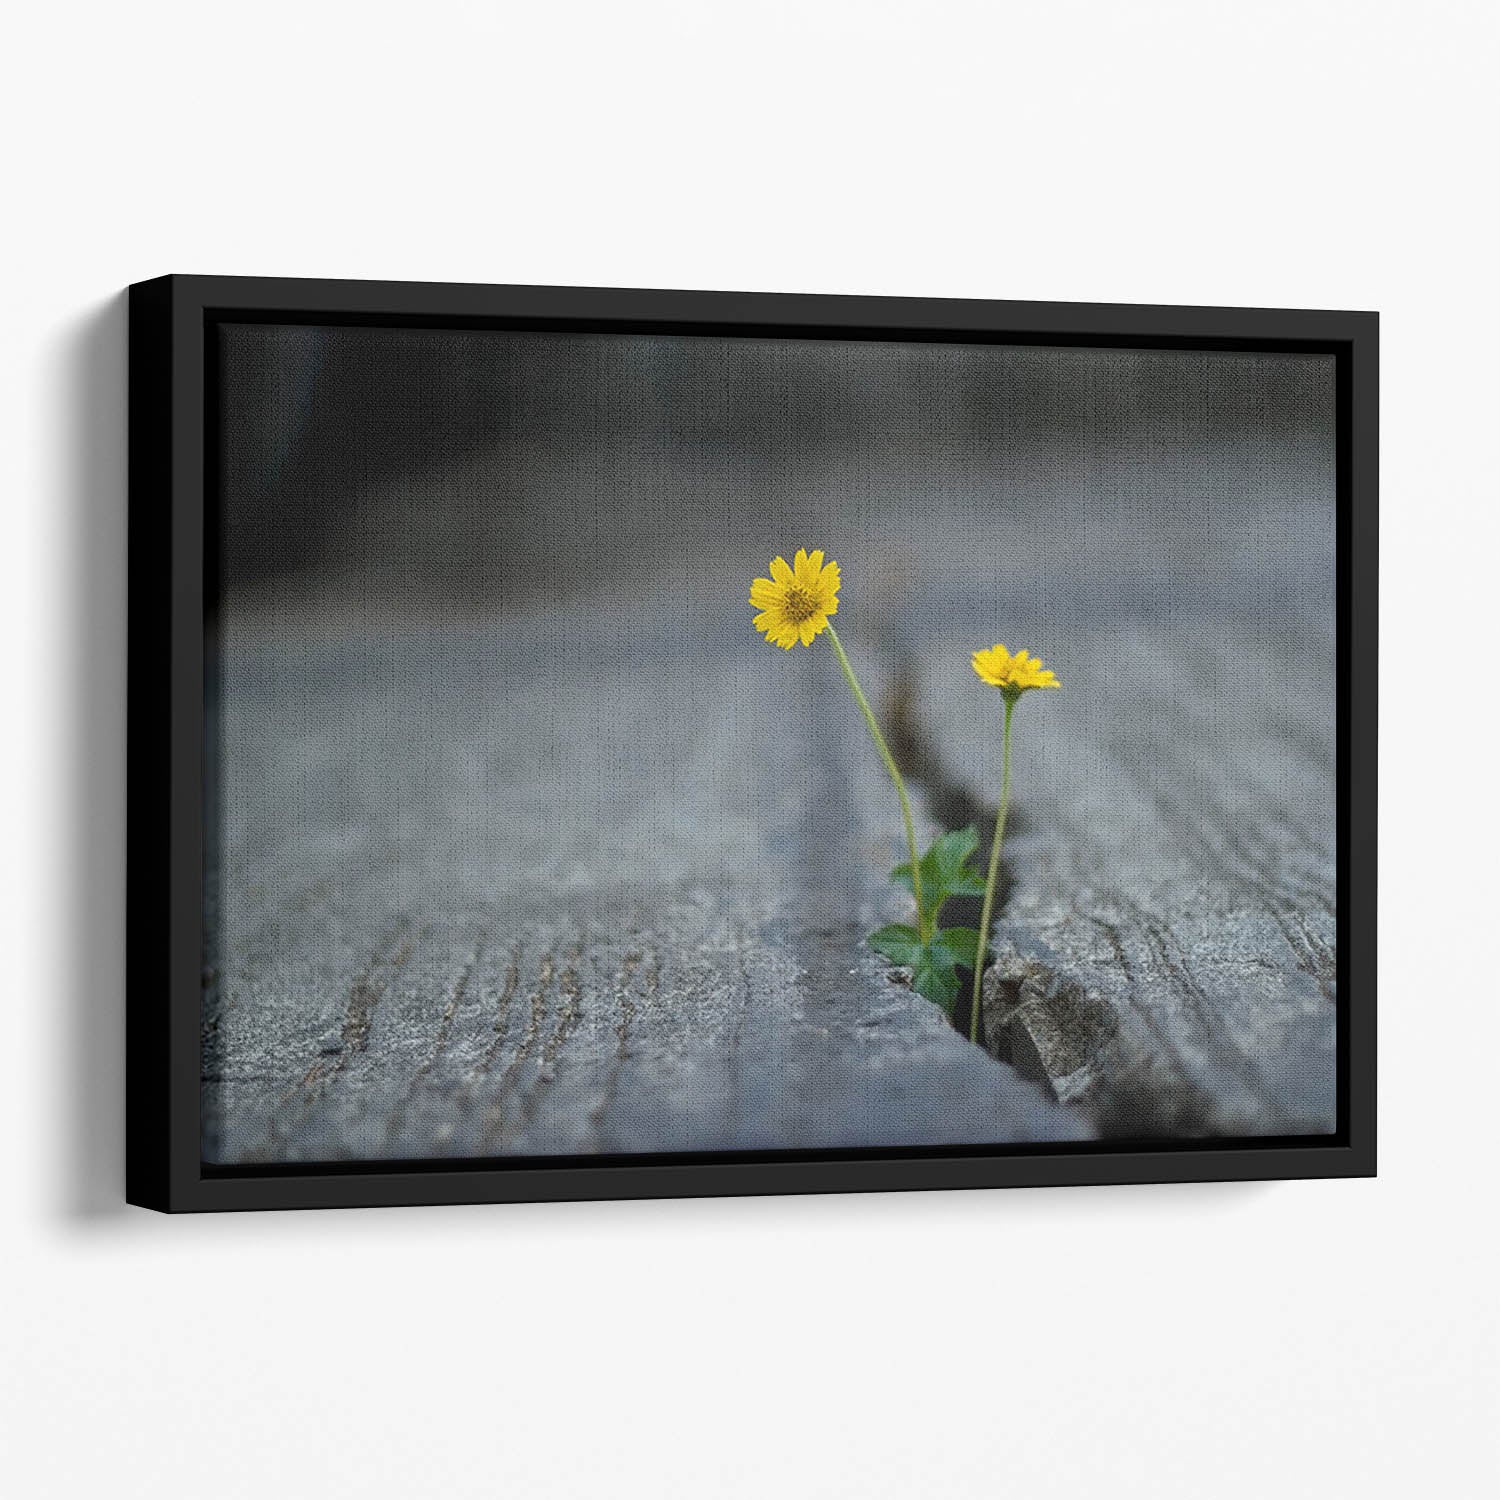 Yellow flower growing in street Floating Framed Canvas